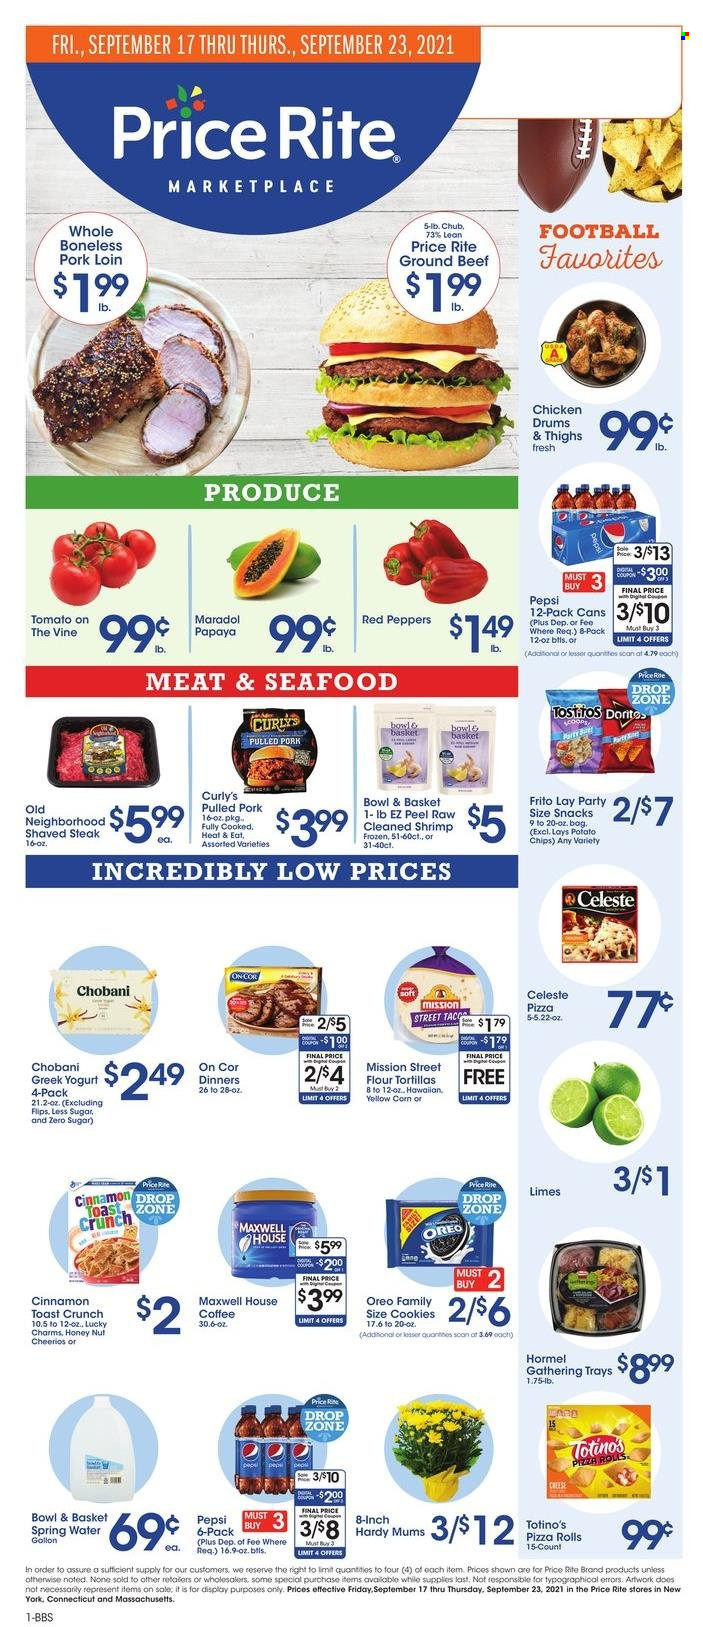 thumbnail - Price Rite Flyer - 09/17/2021 - 09/23/2021 - Sales products - tortillas, pizza rolls, Bowl & Basket, flour tortillas, corn, peppers, red peppers, limes, seafood, shrimps, pizza, pulled pork, Hormel, greek yoghurt, Oreo, yoghurt, Chobani, Celeste, cookies, snack, Doritos, potato chips, Lay’s, Cheerios, cinnamon, Pepsi, Maxwell House, coffee, red wine, wine, beef meat, ground beef, steak, pork loin, pork meat. Page 1.